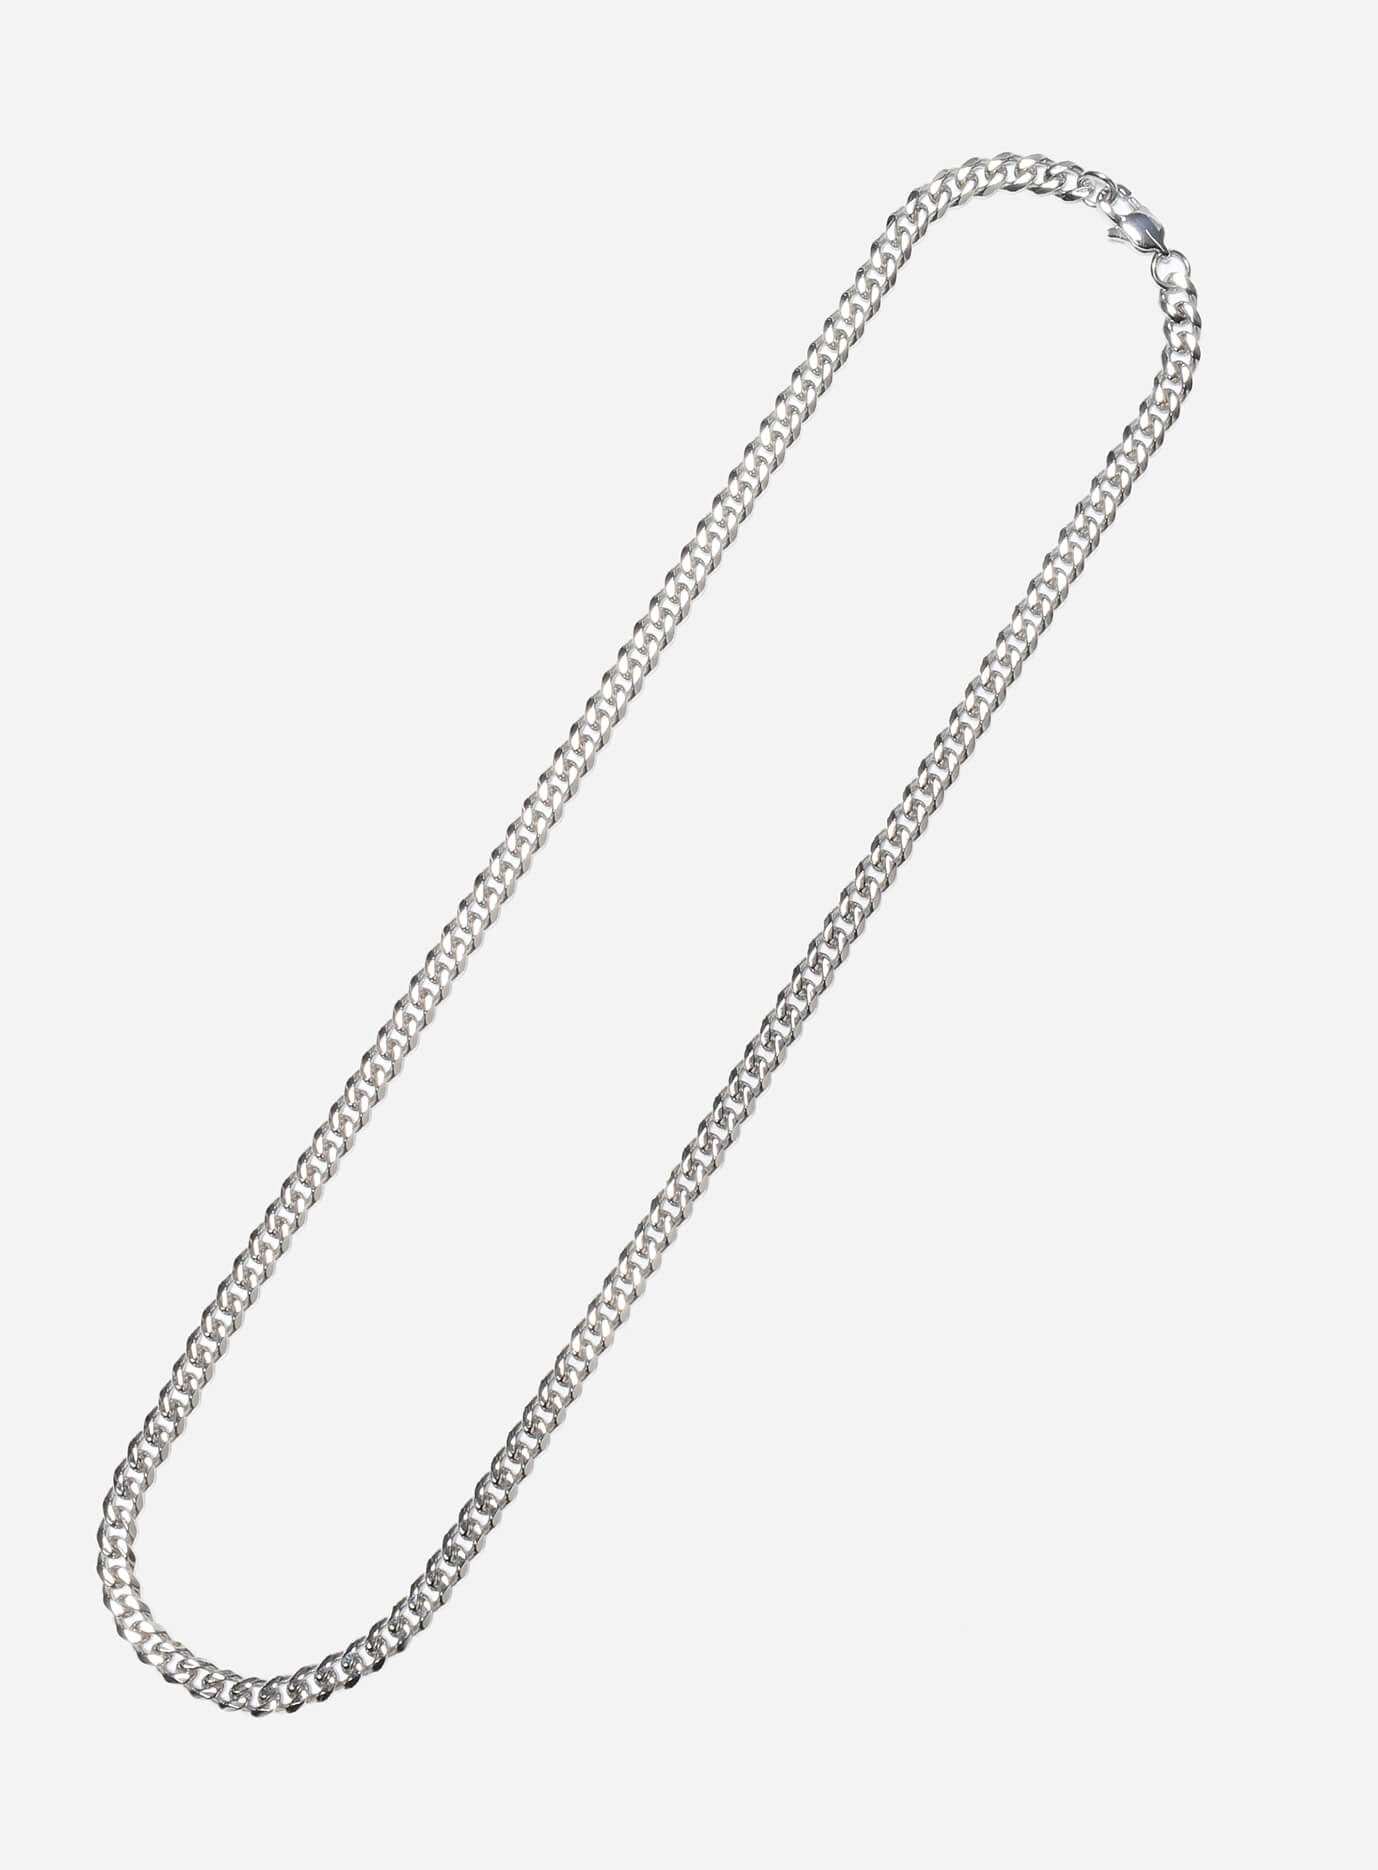 GD Stainless Steel Chain 7mm x 51cm